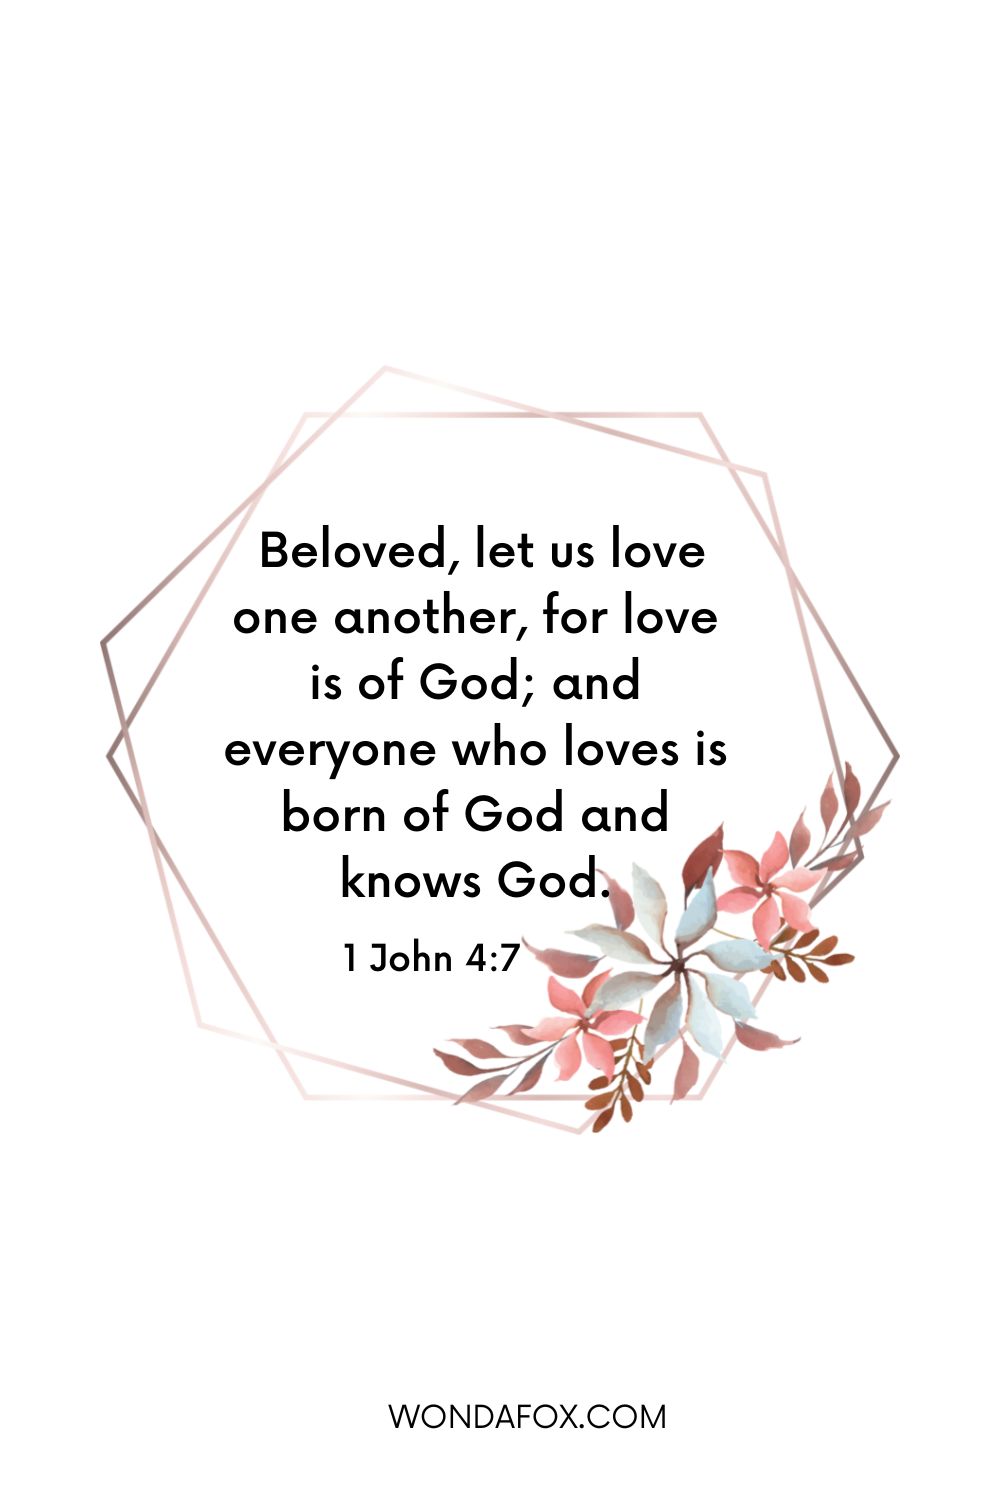  Beloved, let us love one another, for love is of God; and everyone who loves is born of God and knows God.